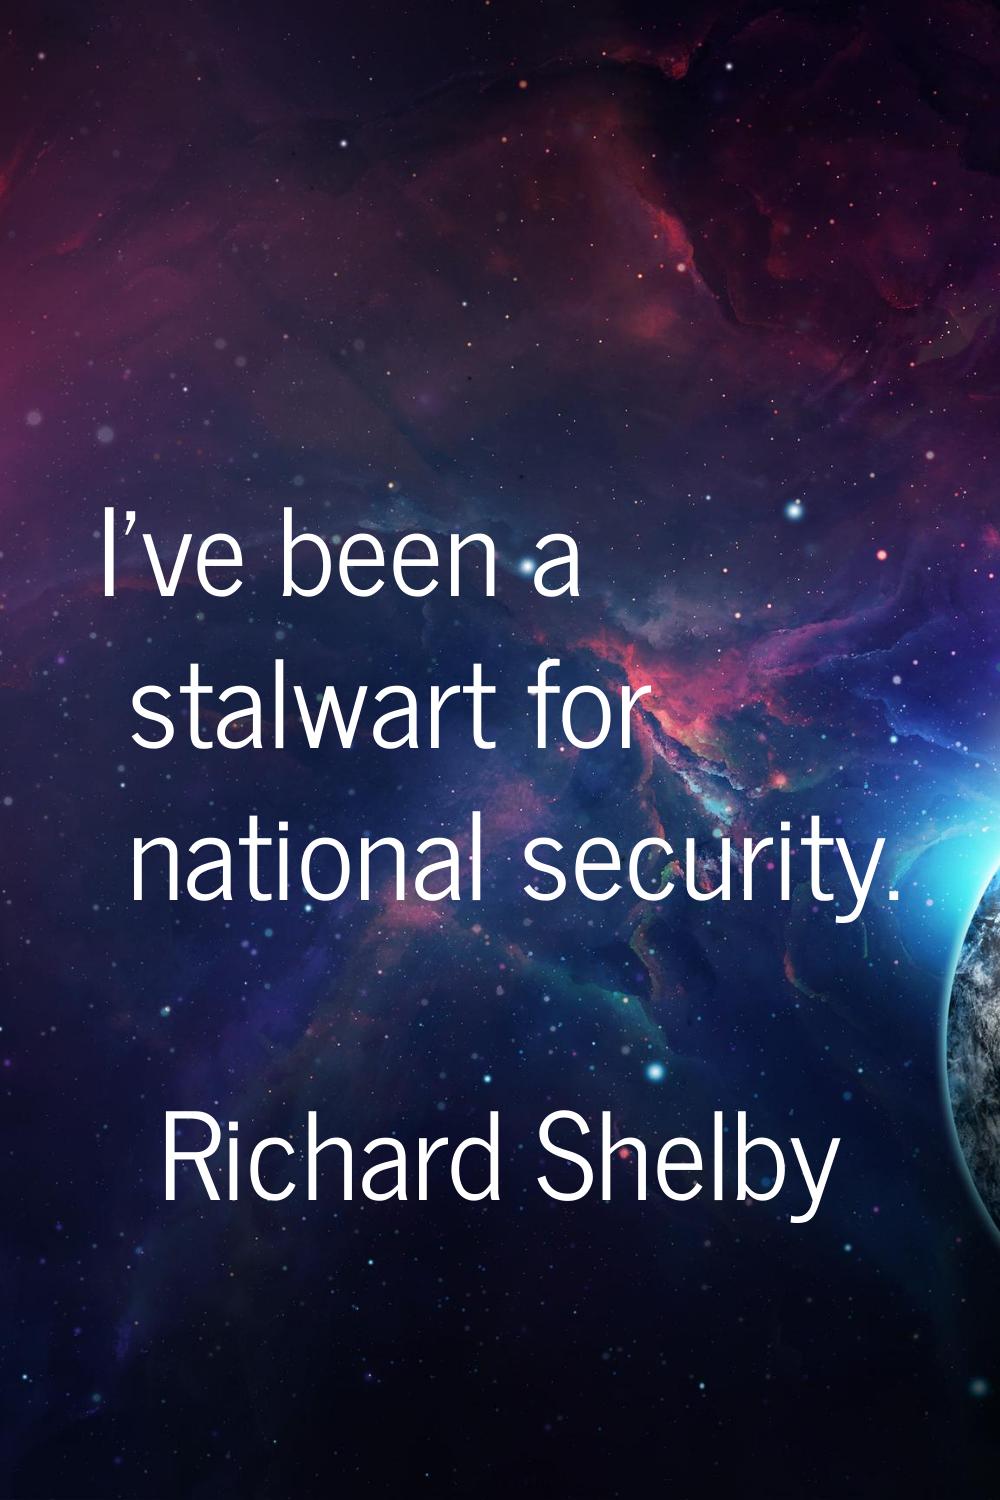 I've been a stalwart for national security.